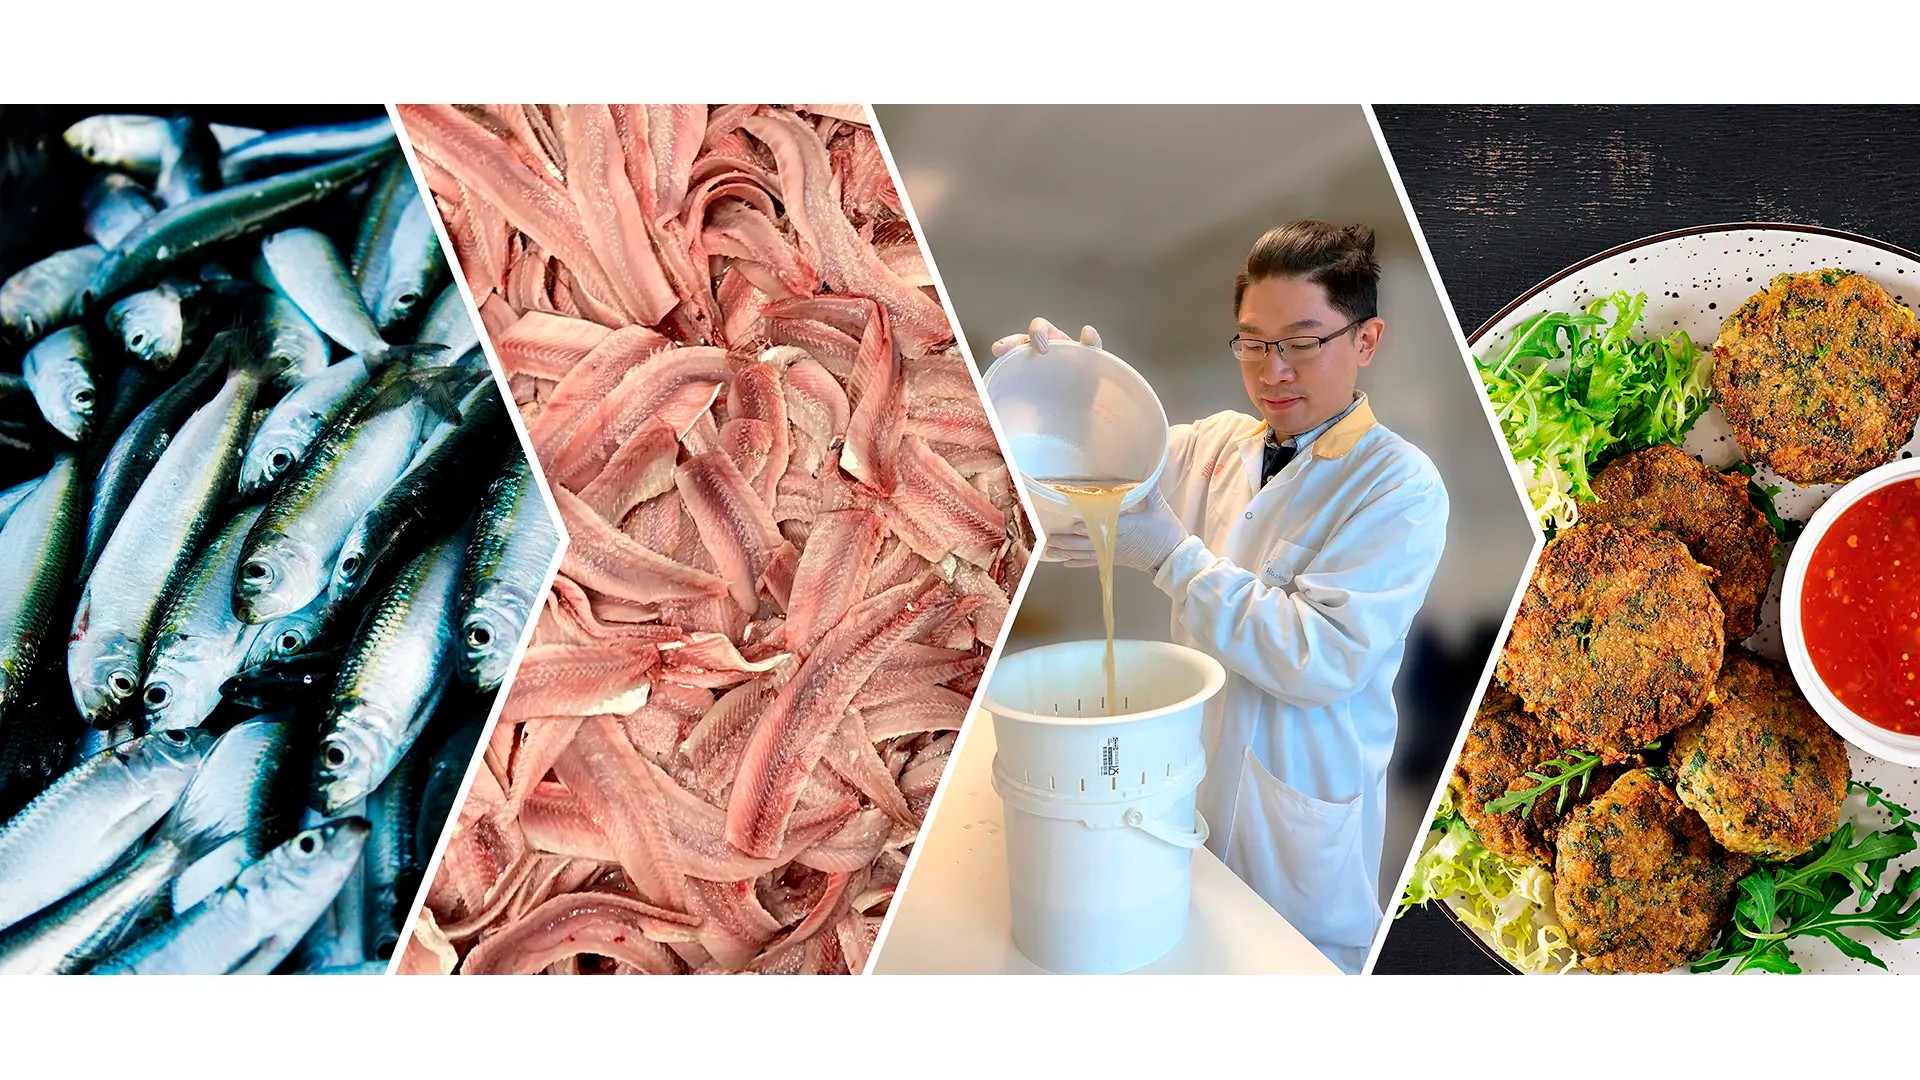 Herring, fillets, researcher Haizhou Wu and fish burgers, collage.